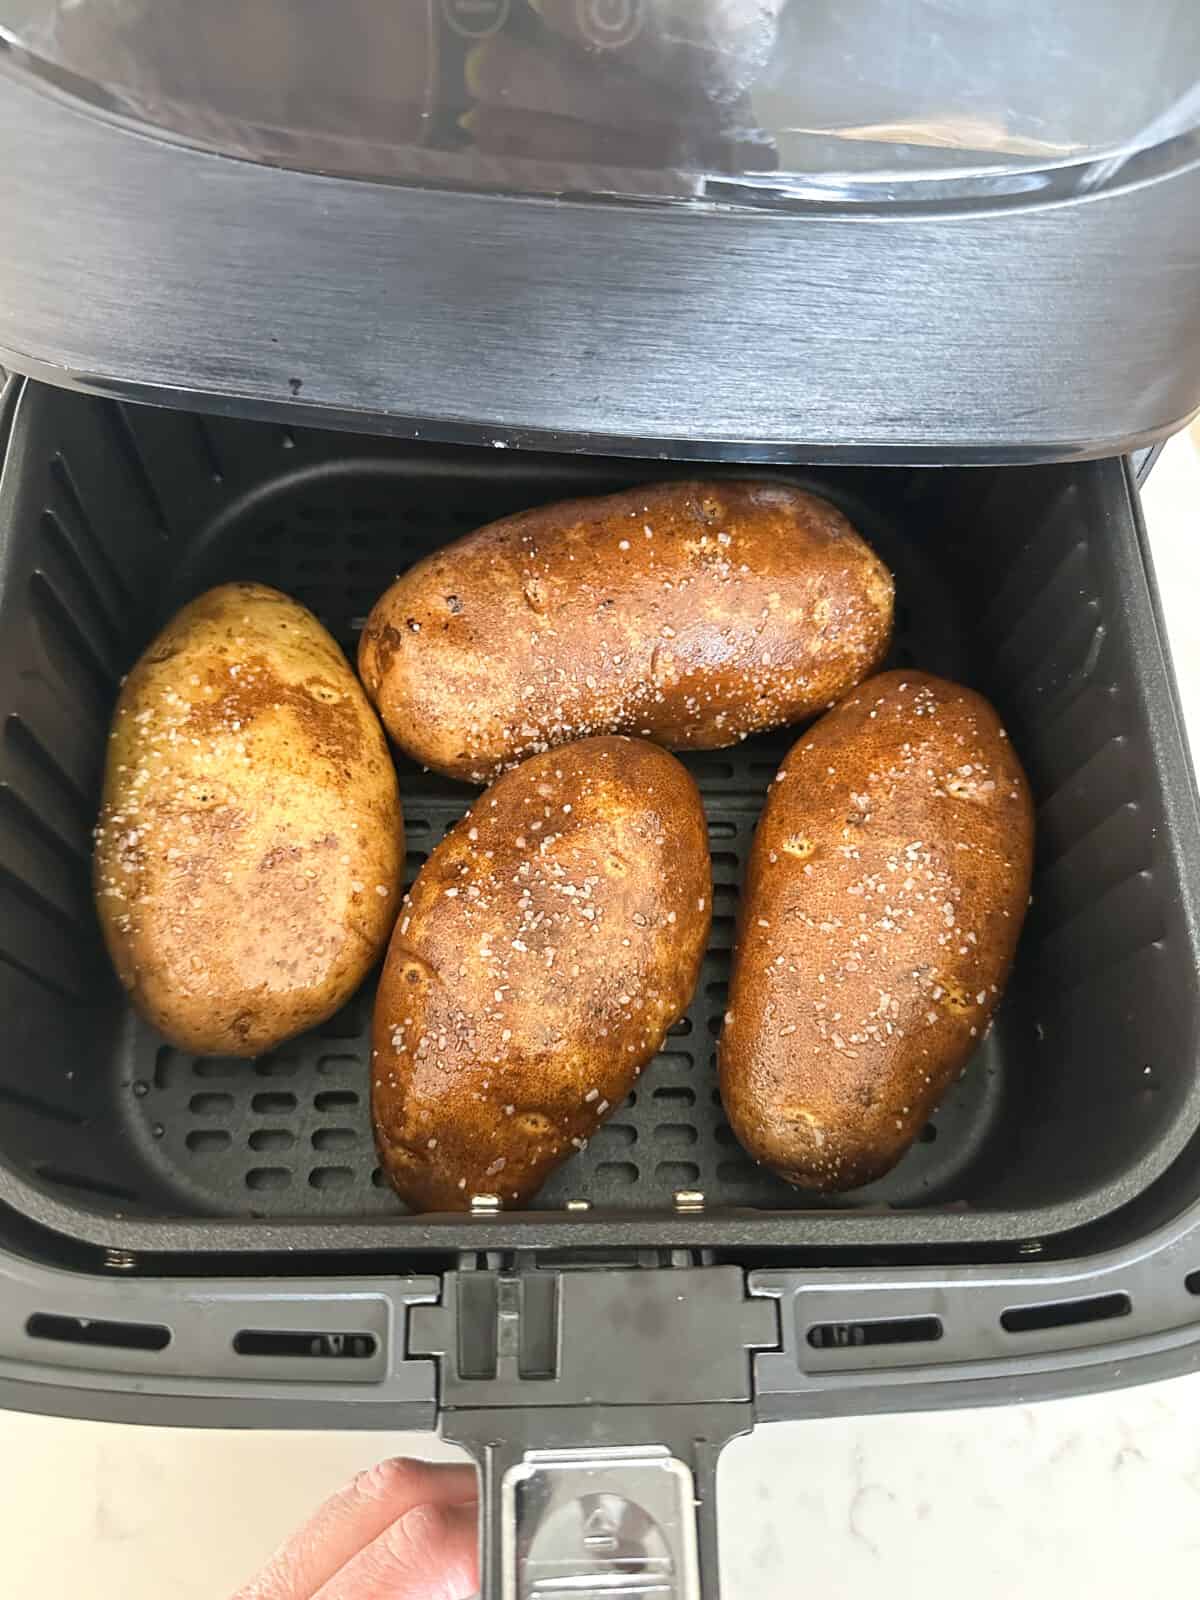 salted potatoes inside air fryer ready to cook